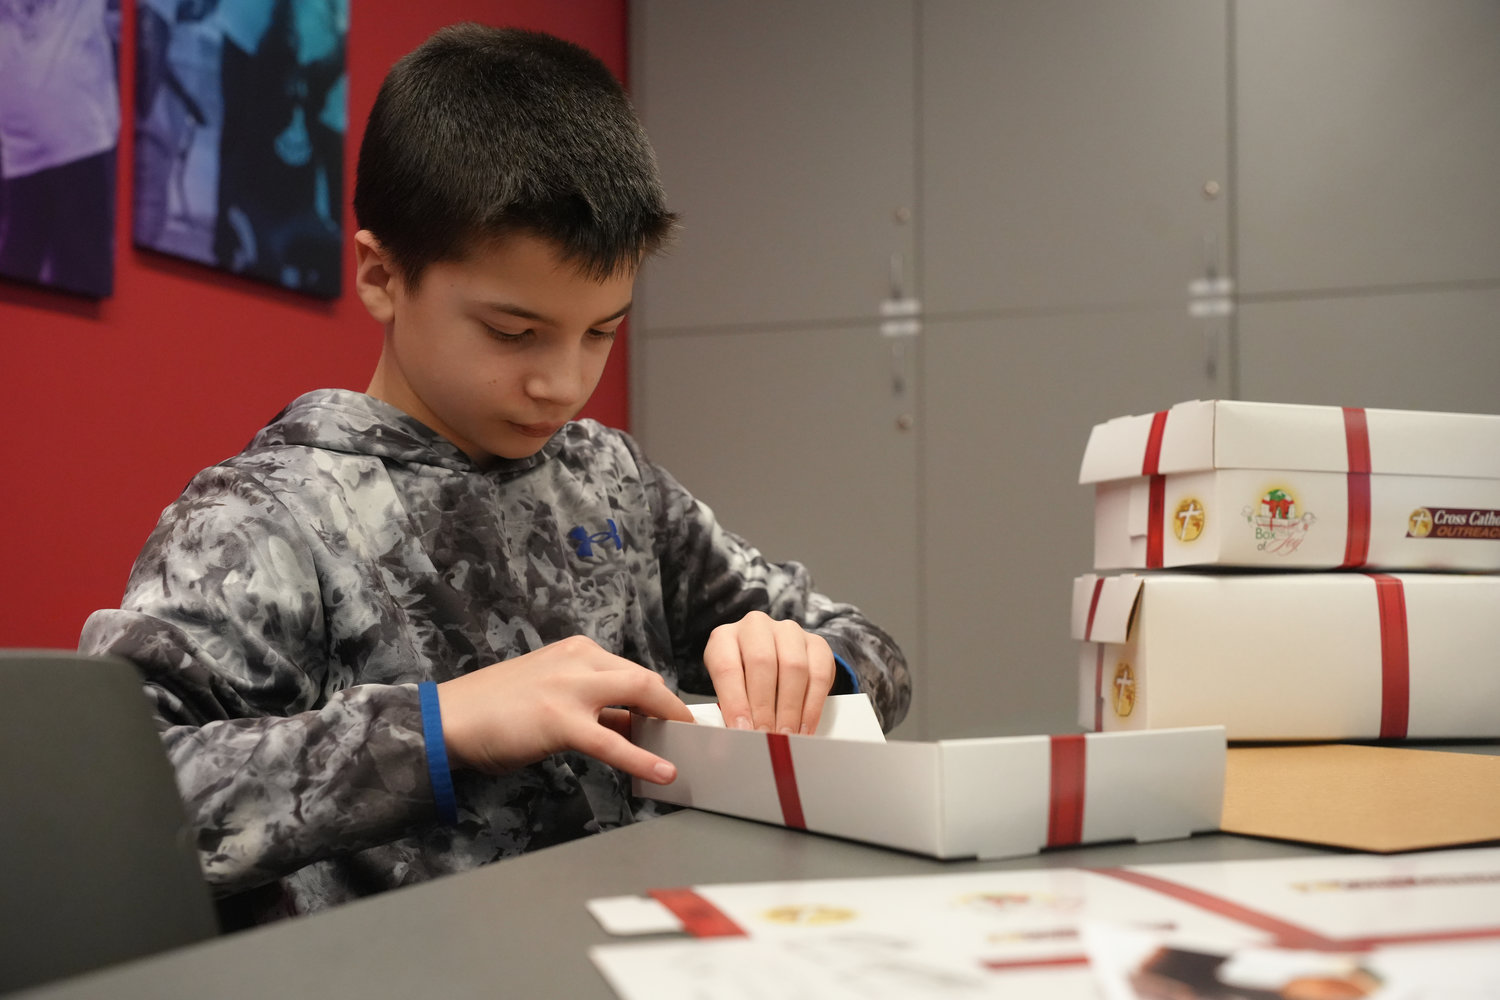 William Shuart, 12, of Bellmore helps fold boxes during the MLK Day of Service event at Molloy University.